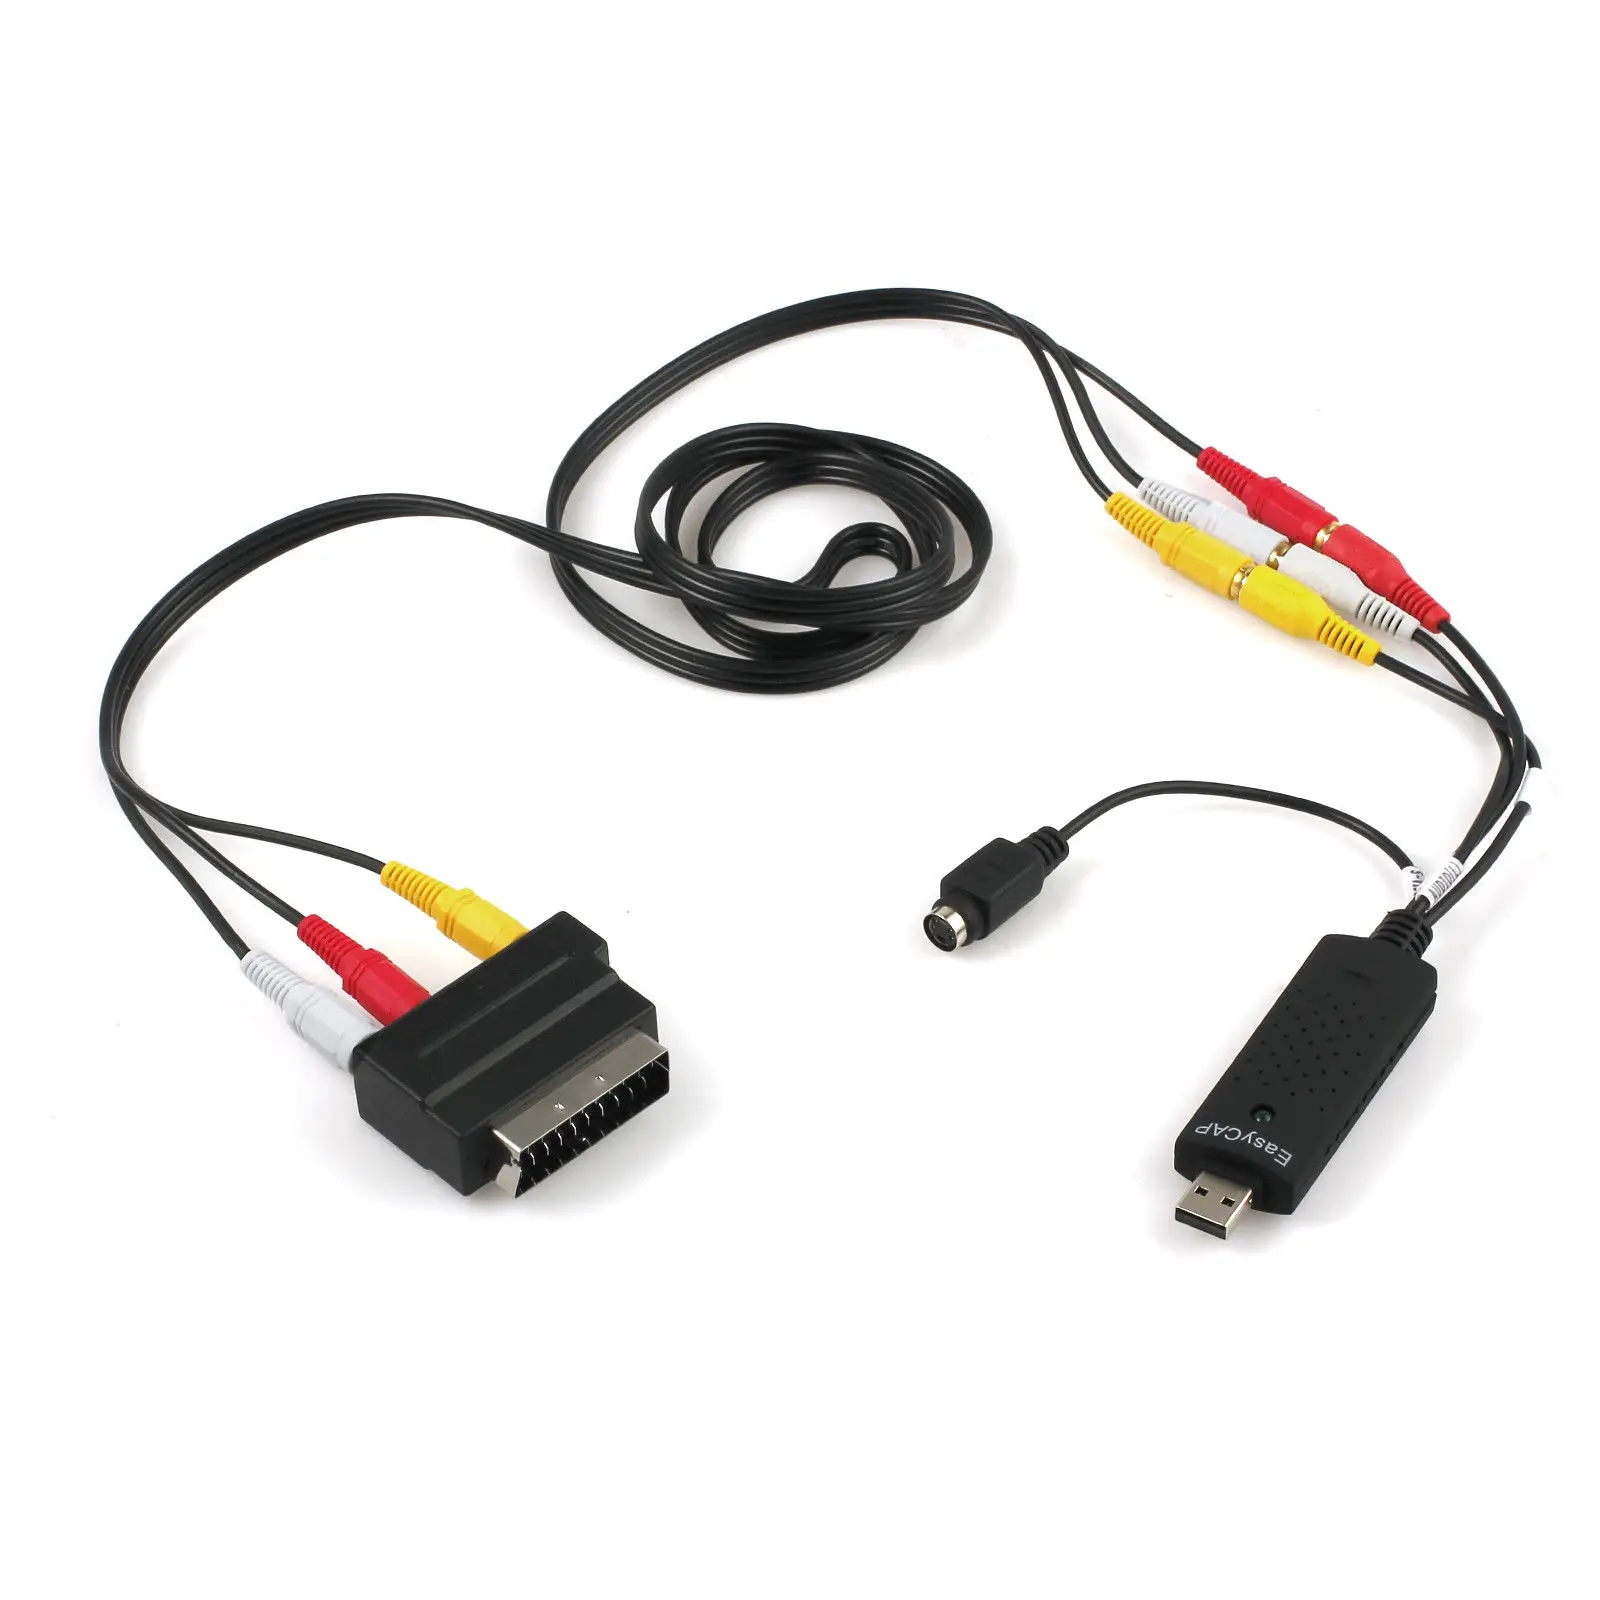 Фото Usb2.0 Vhs To Dvd Converter o Video Capture Kit Scart Rca Cable For Win10 | Электроника